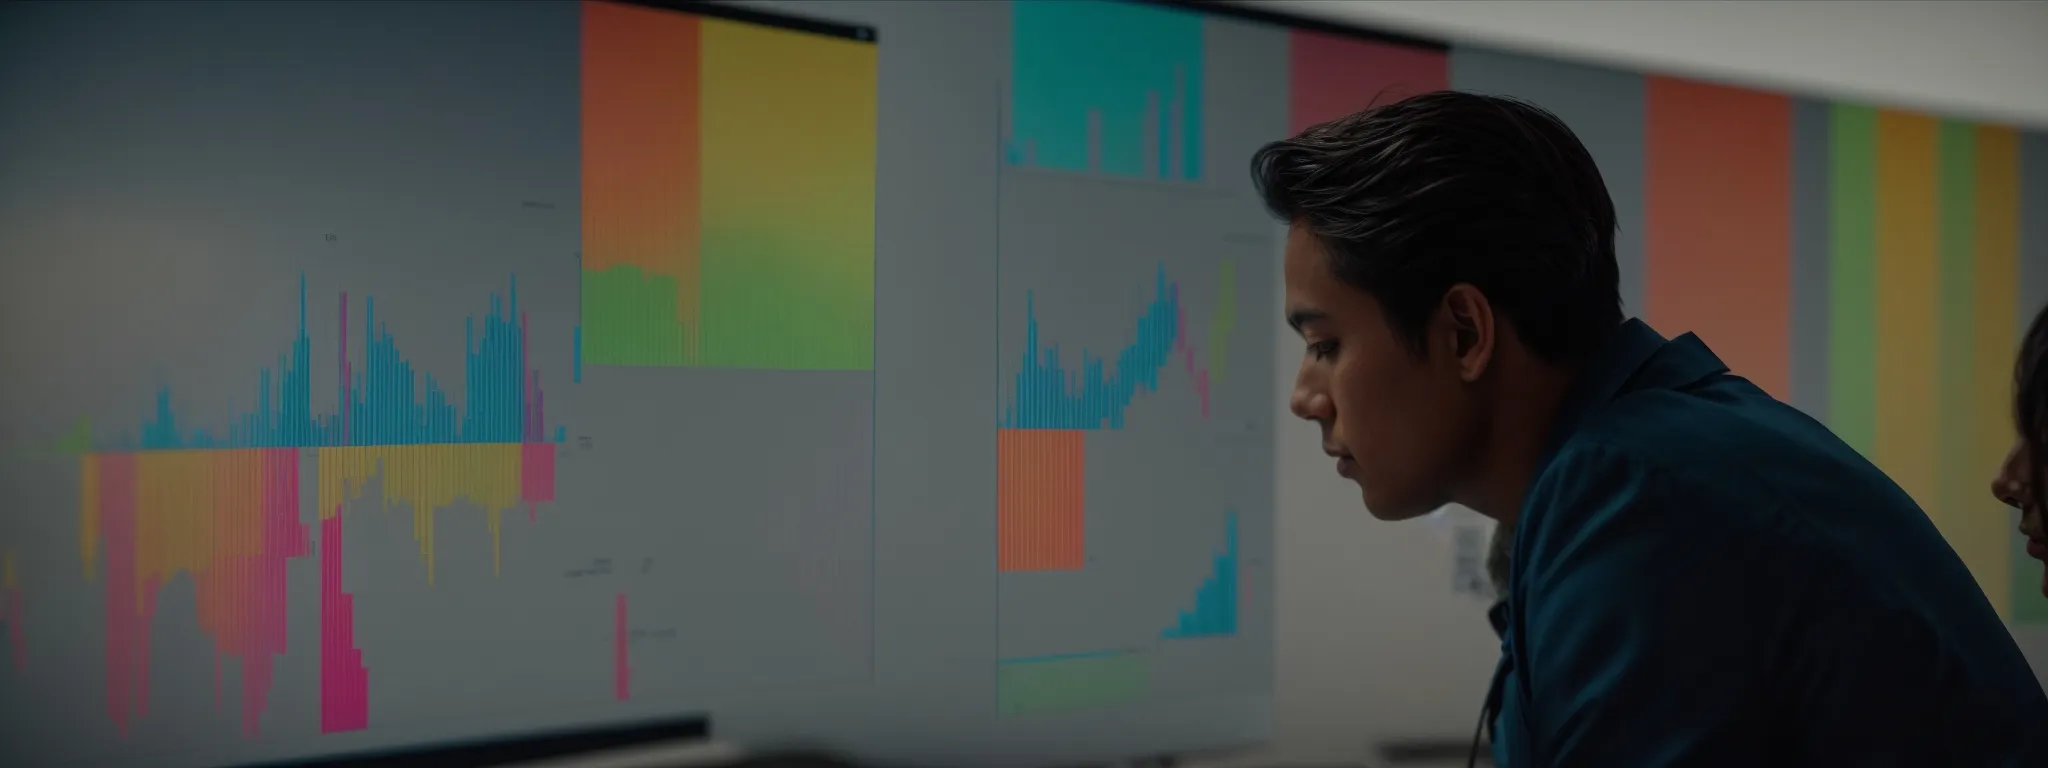 a marketing professional studies a colorful graph illustrating increasing trends on a computer screen.